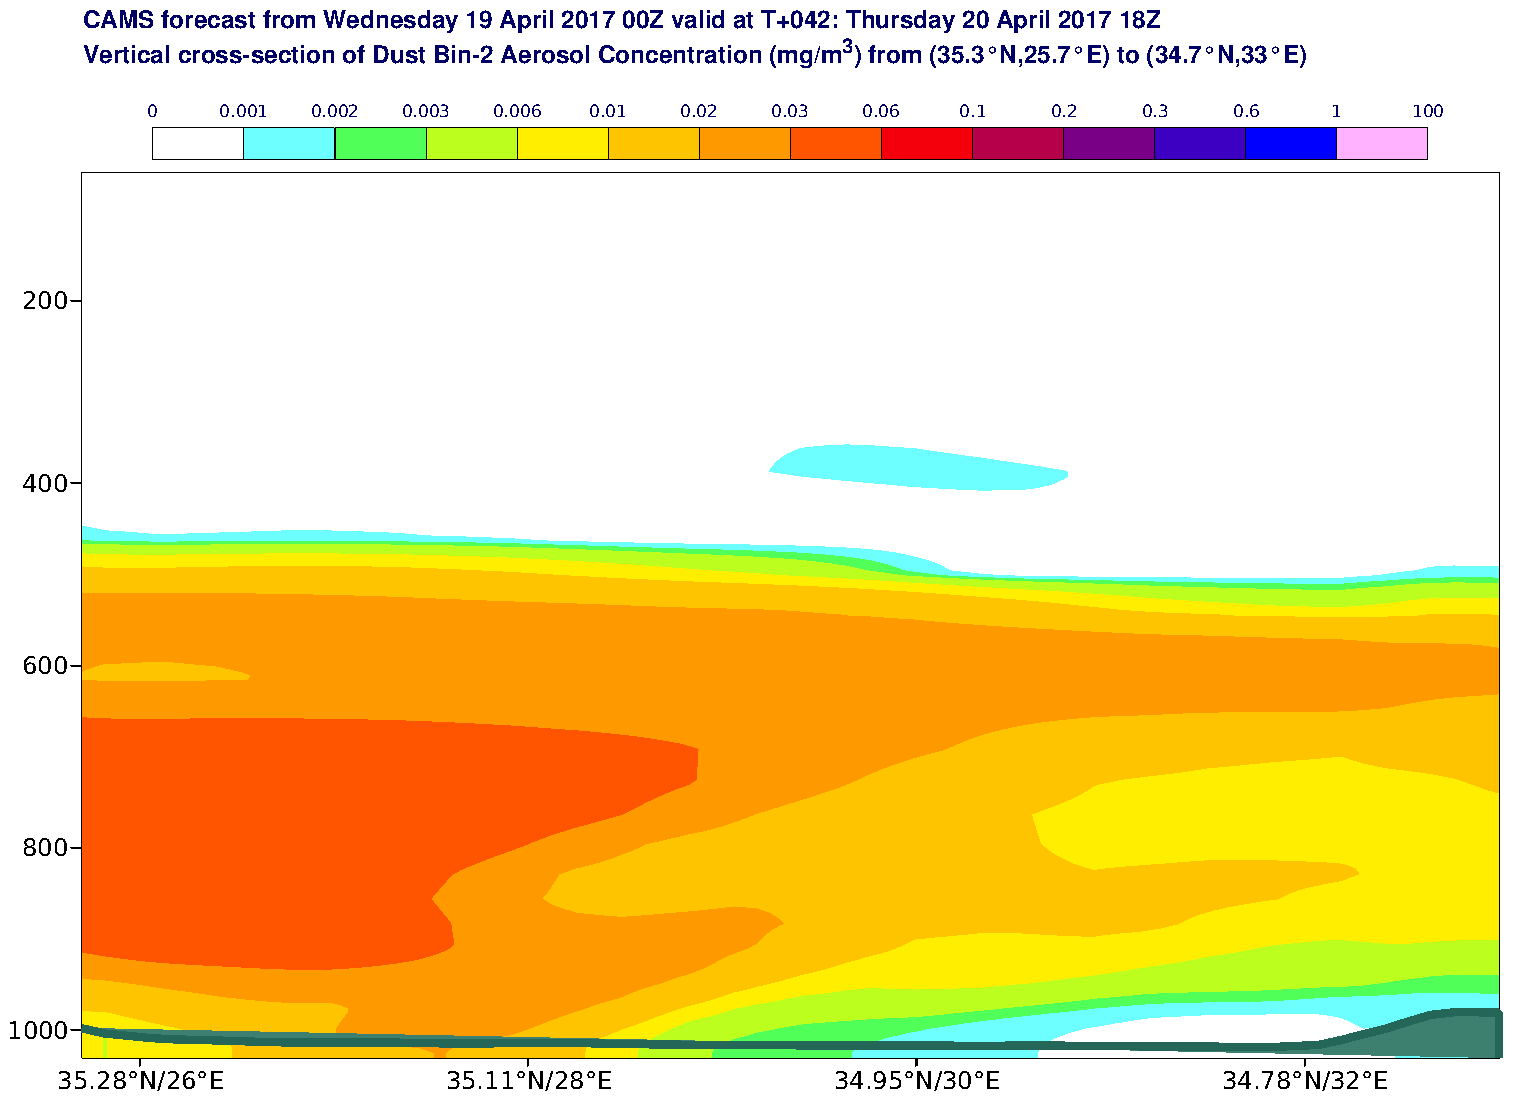 Vertical cross-section of Dust Bin-2 Aerosol Concentration (mg/m3) valid at T42 - 2017-04-20 18:00